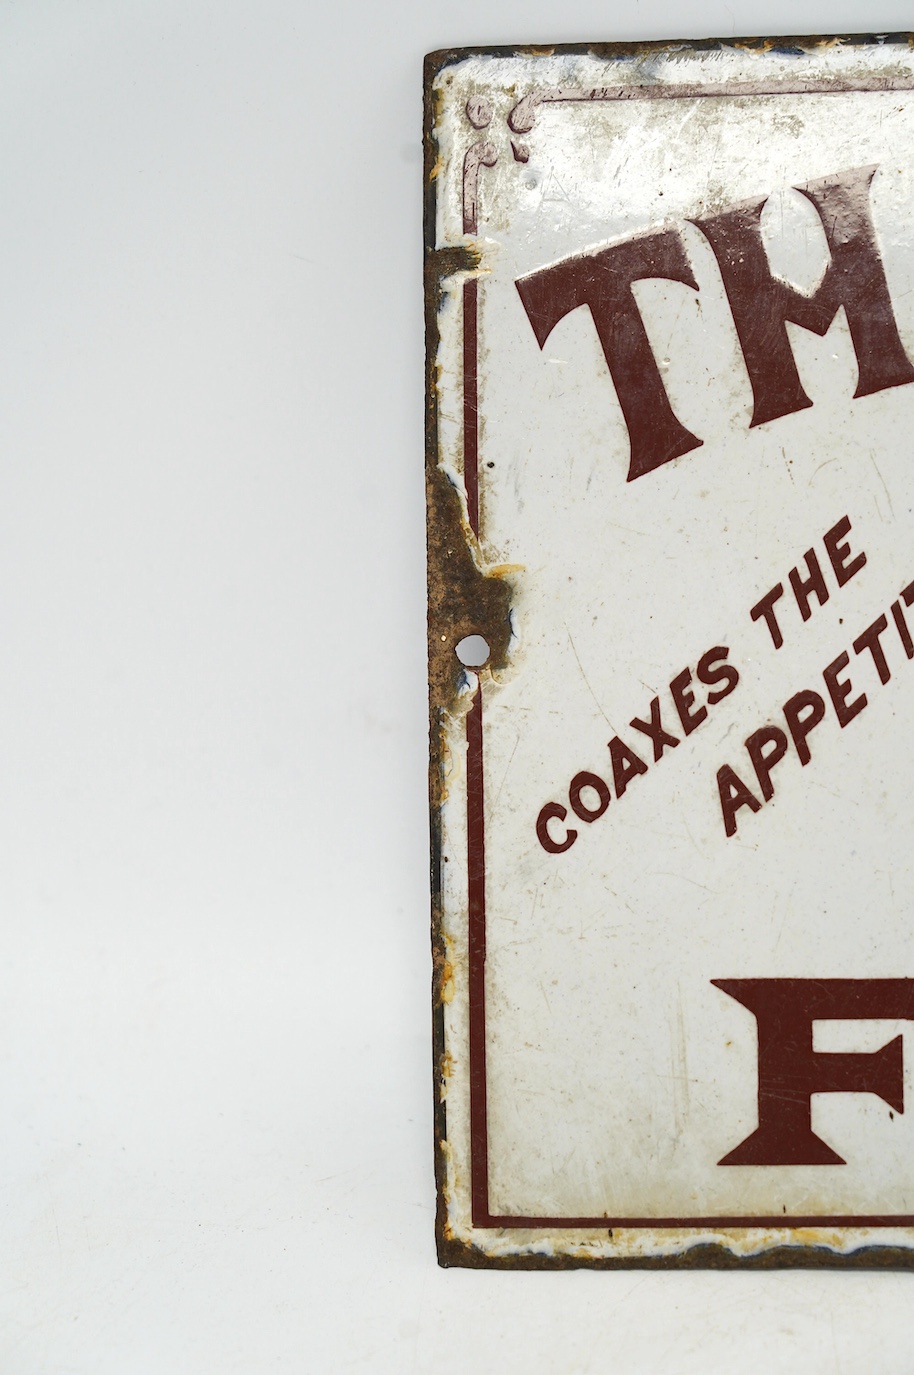 An early 20th century Thorley's Food rectangular enamel advertising sign, 30 x 20cm. Condition - poor to fair